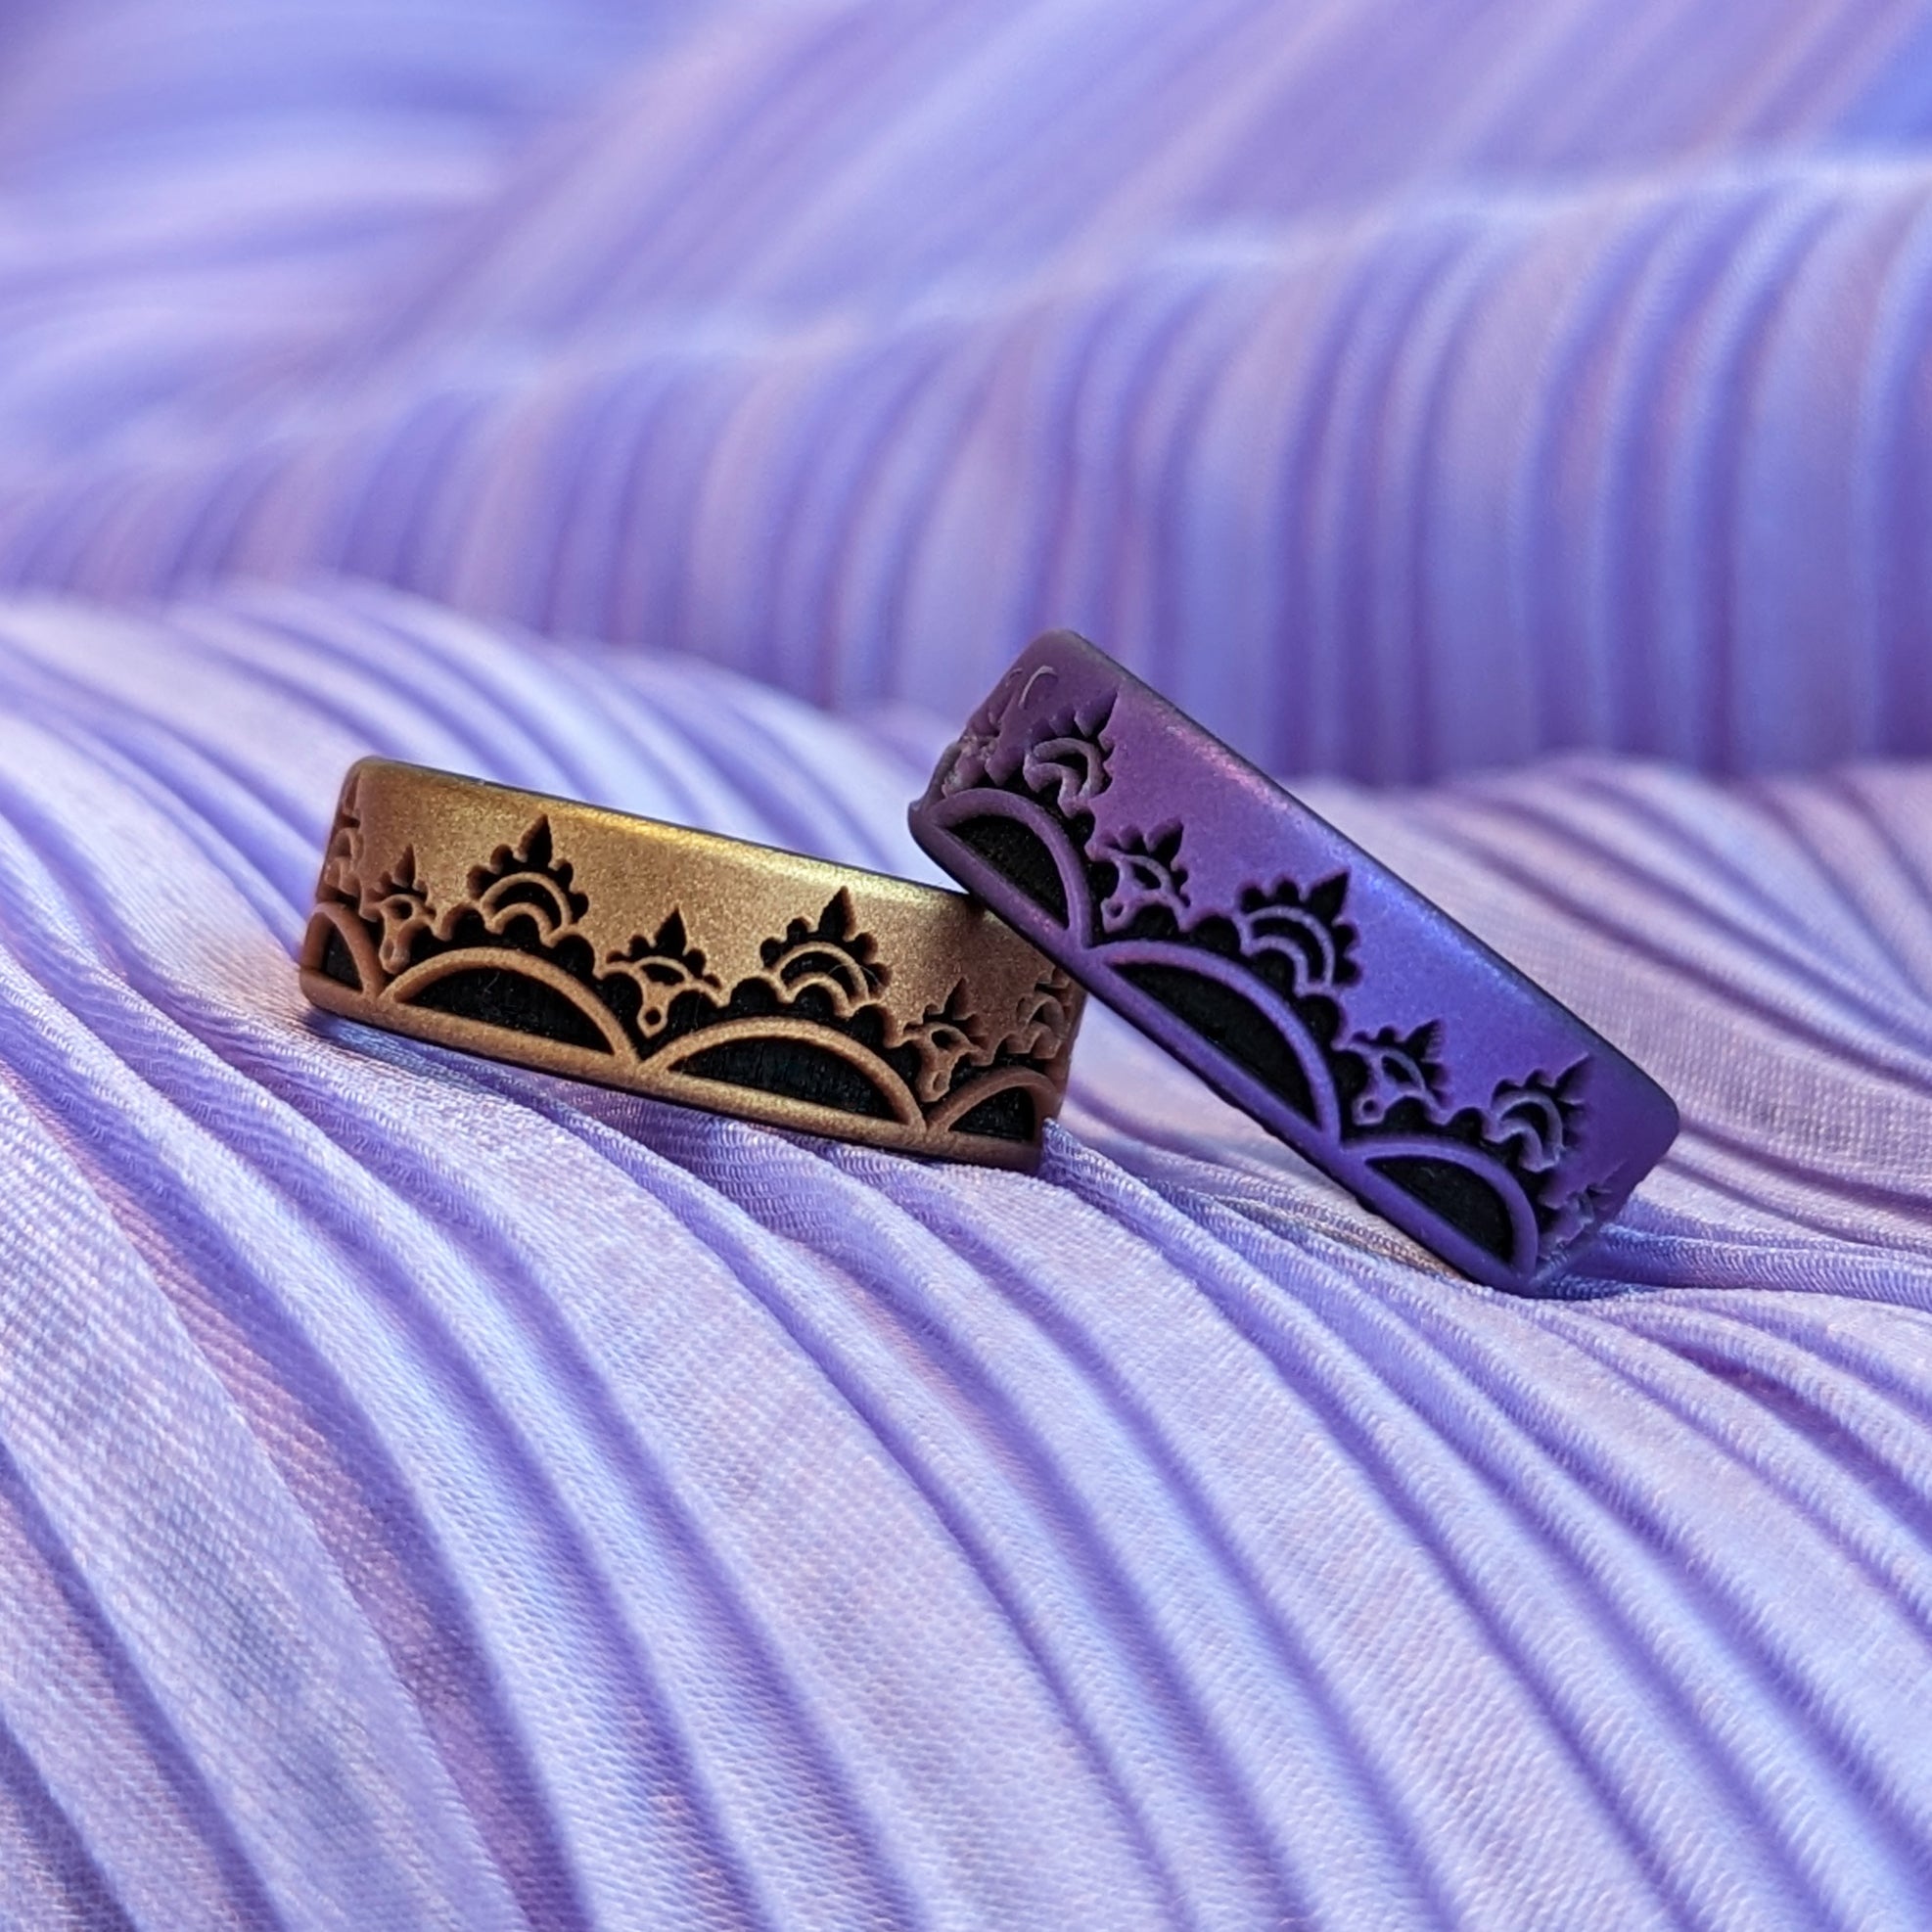 Crowns Silicone Wedding Ring - Chakra & Mehndi Henna Inspired - Engraved Dual Layer - Knot Theory